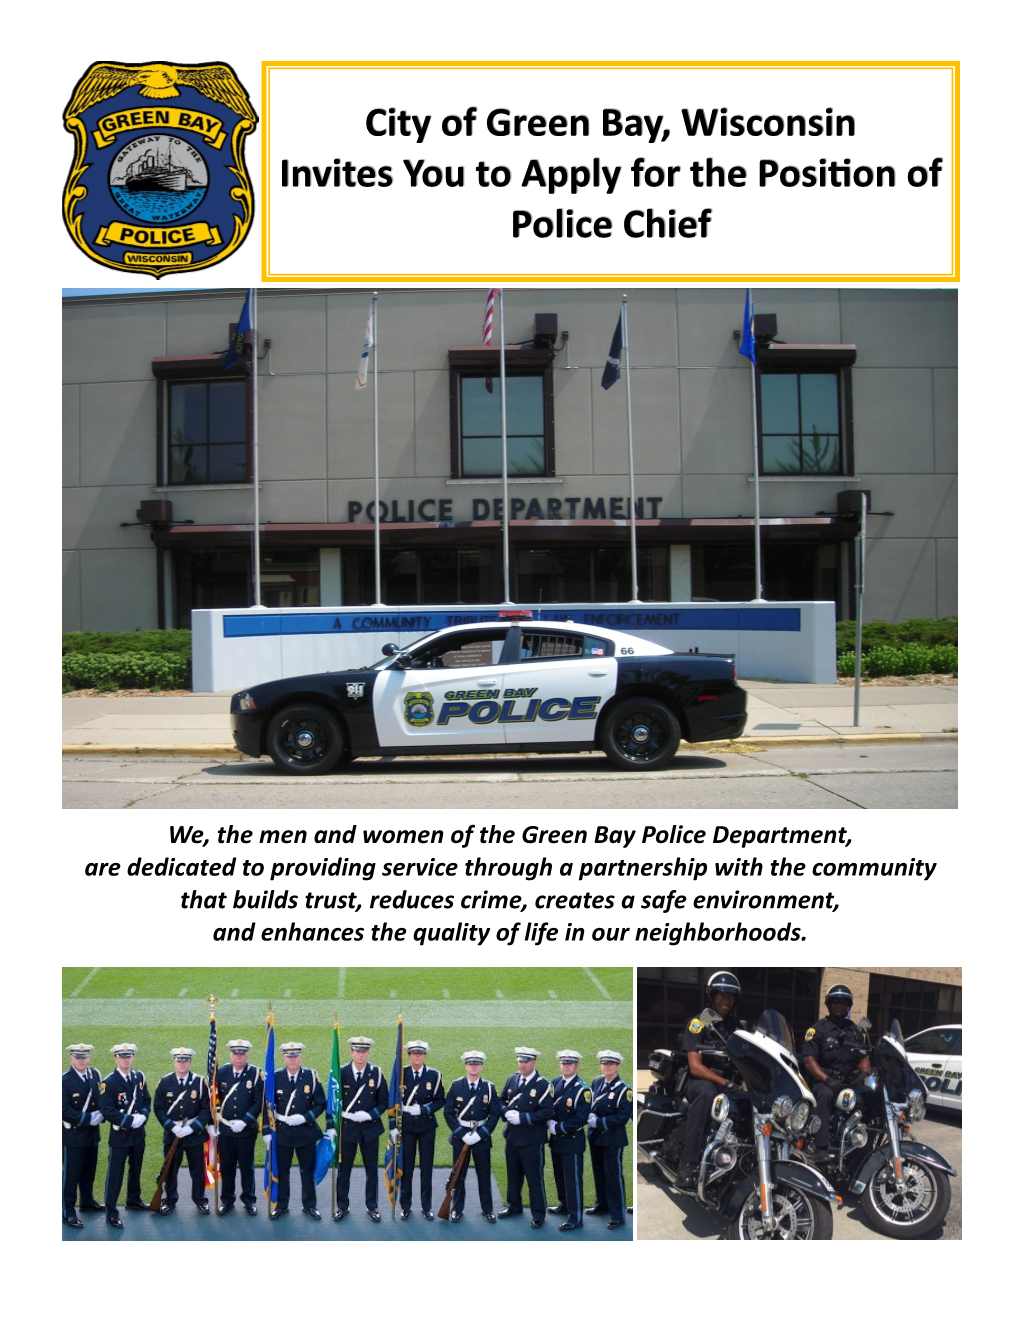 City of Green Bay, Wisconsin Invites You to Apply for the Position of Police Chief